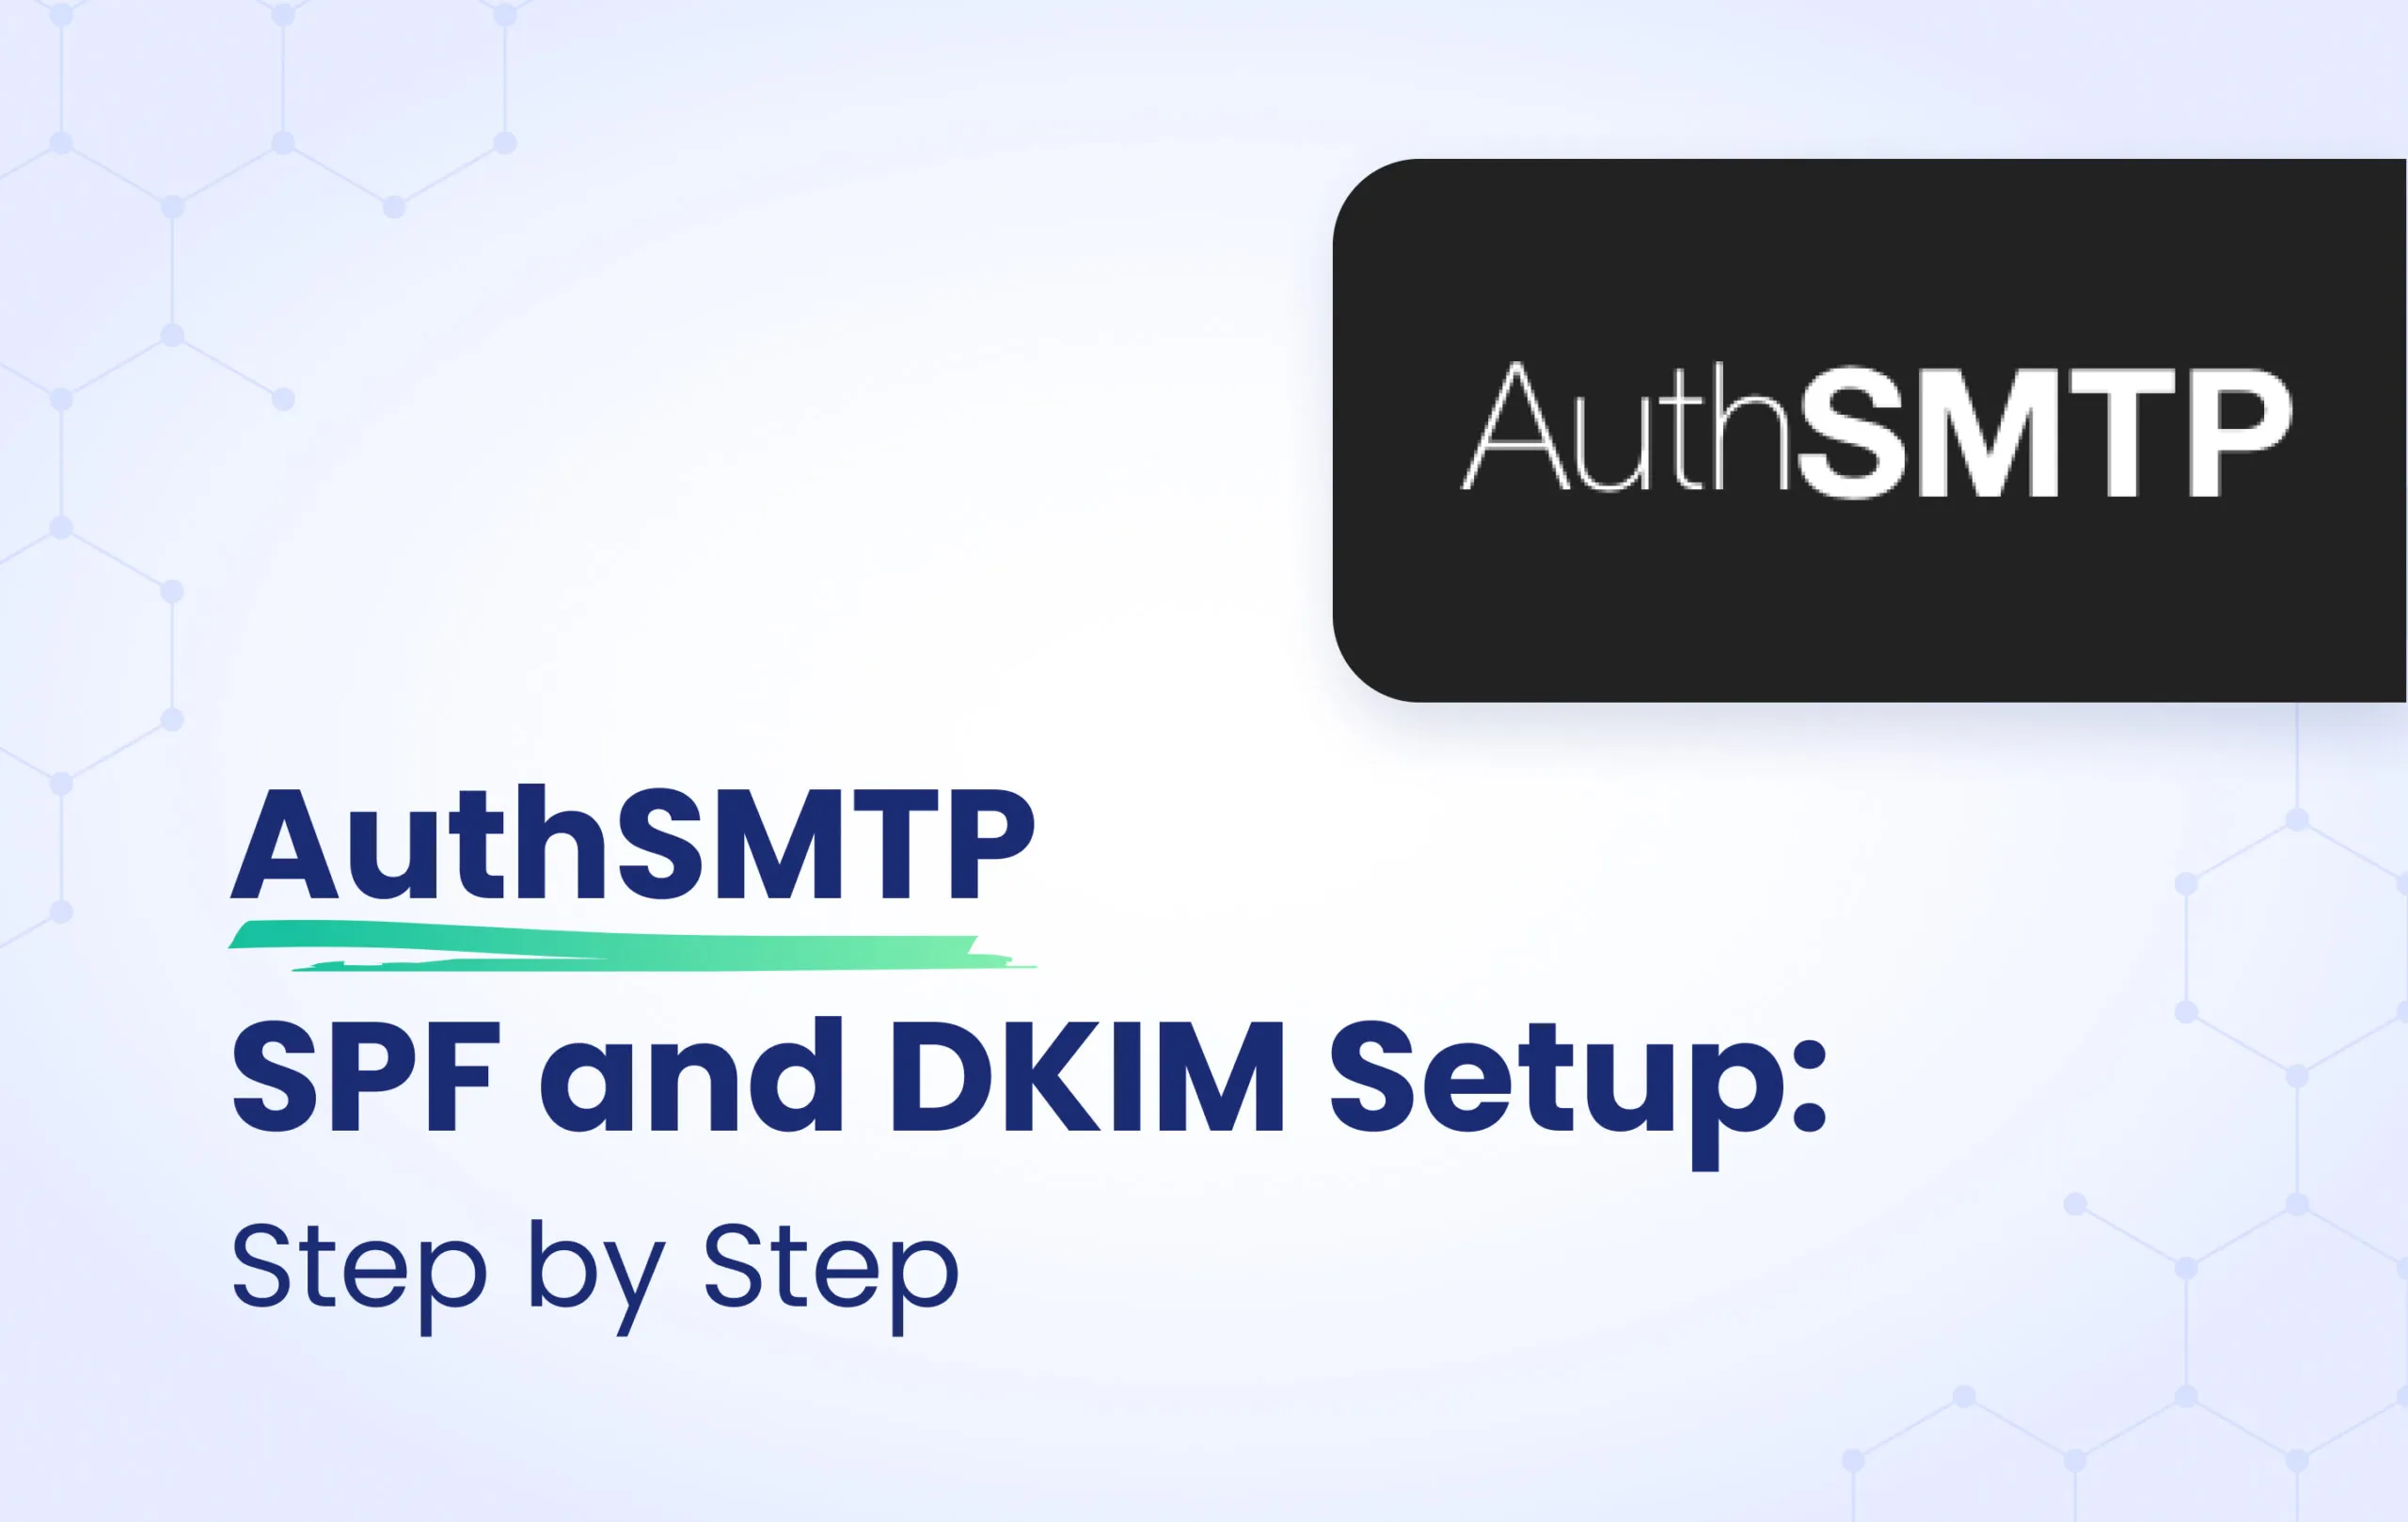 AuthSMTP SPF and DKIM configuration